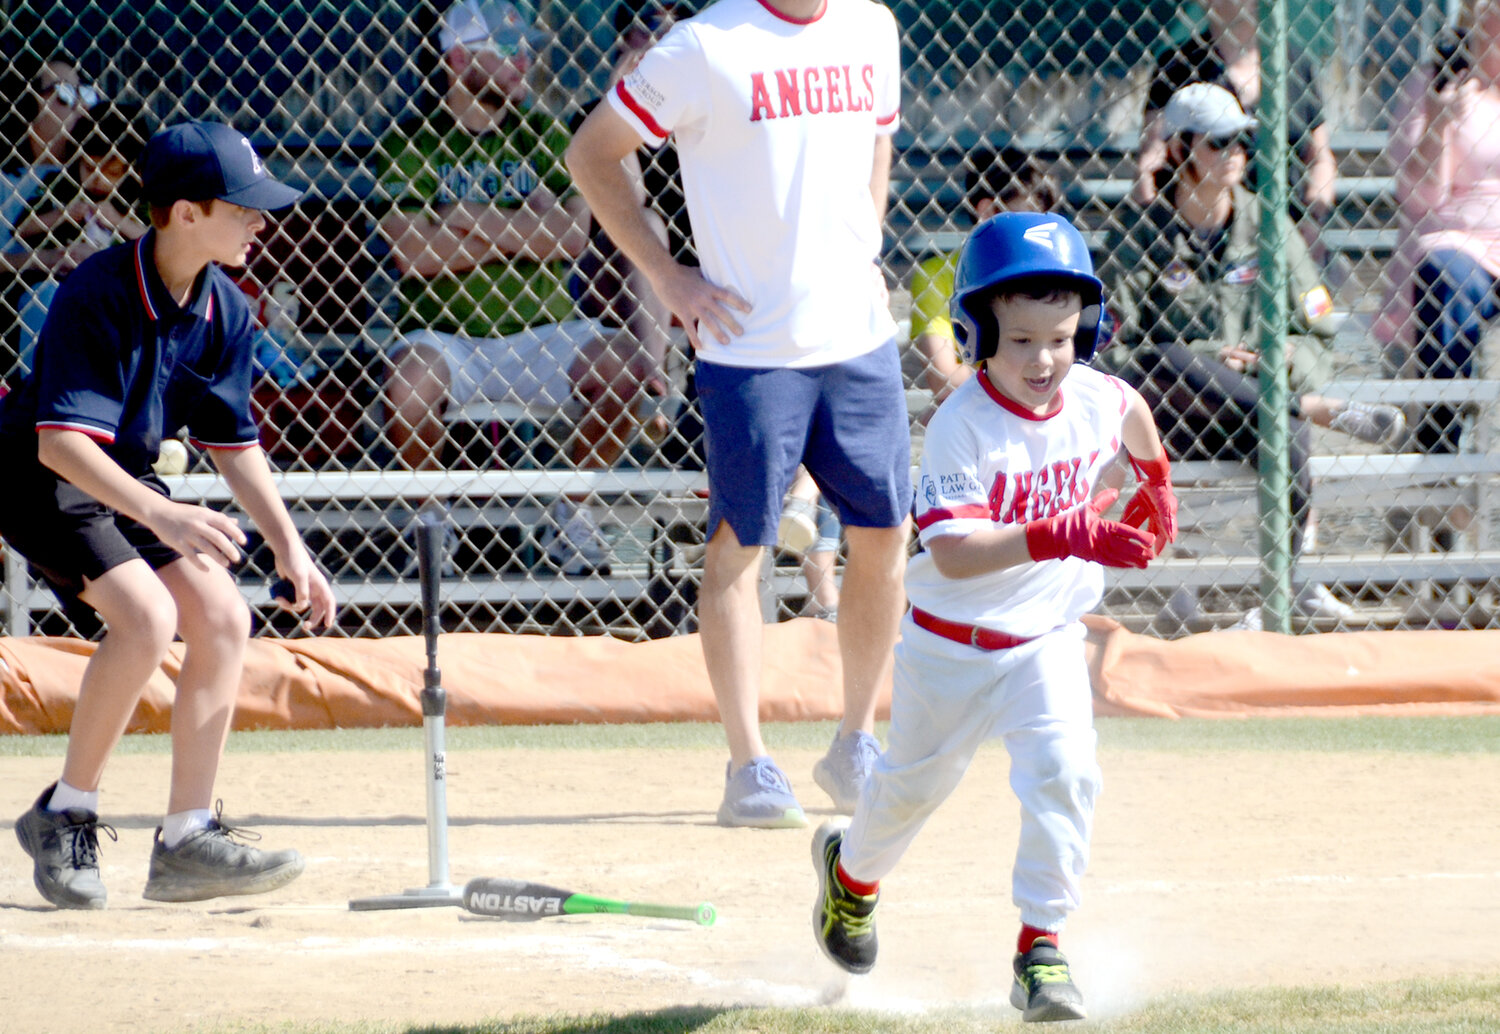 Ryan Corcia of the Angels runs to first after a hit.